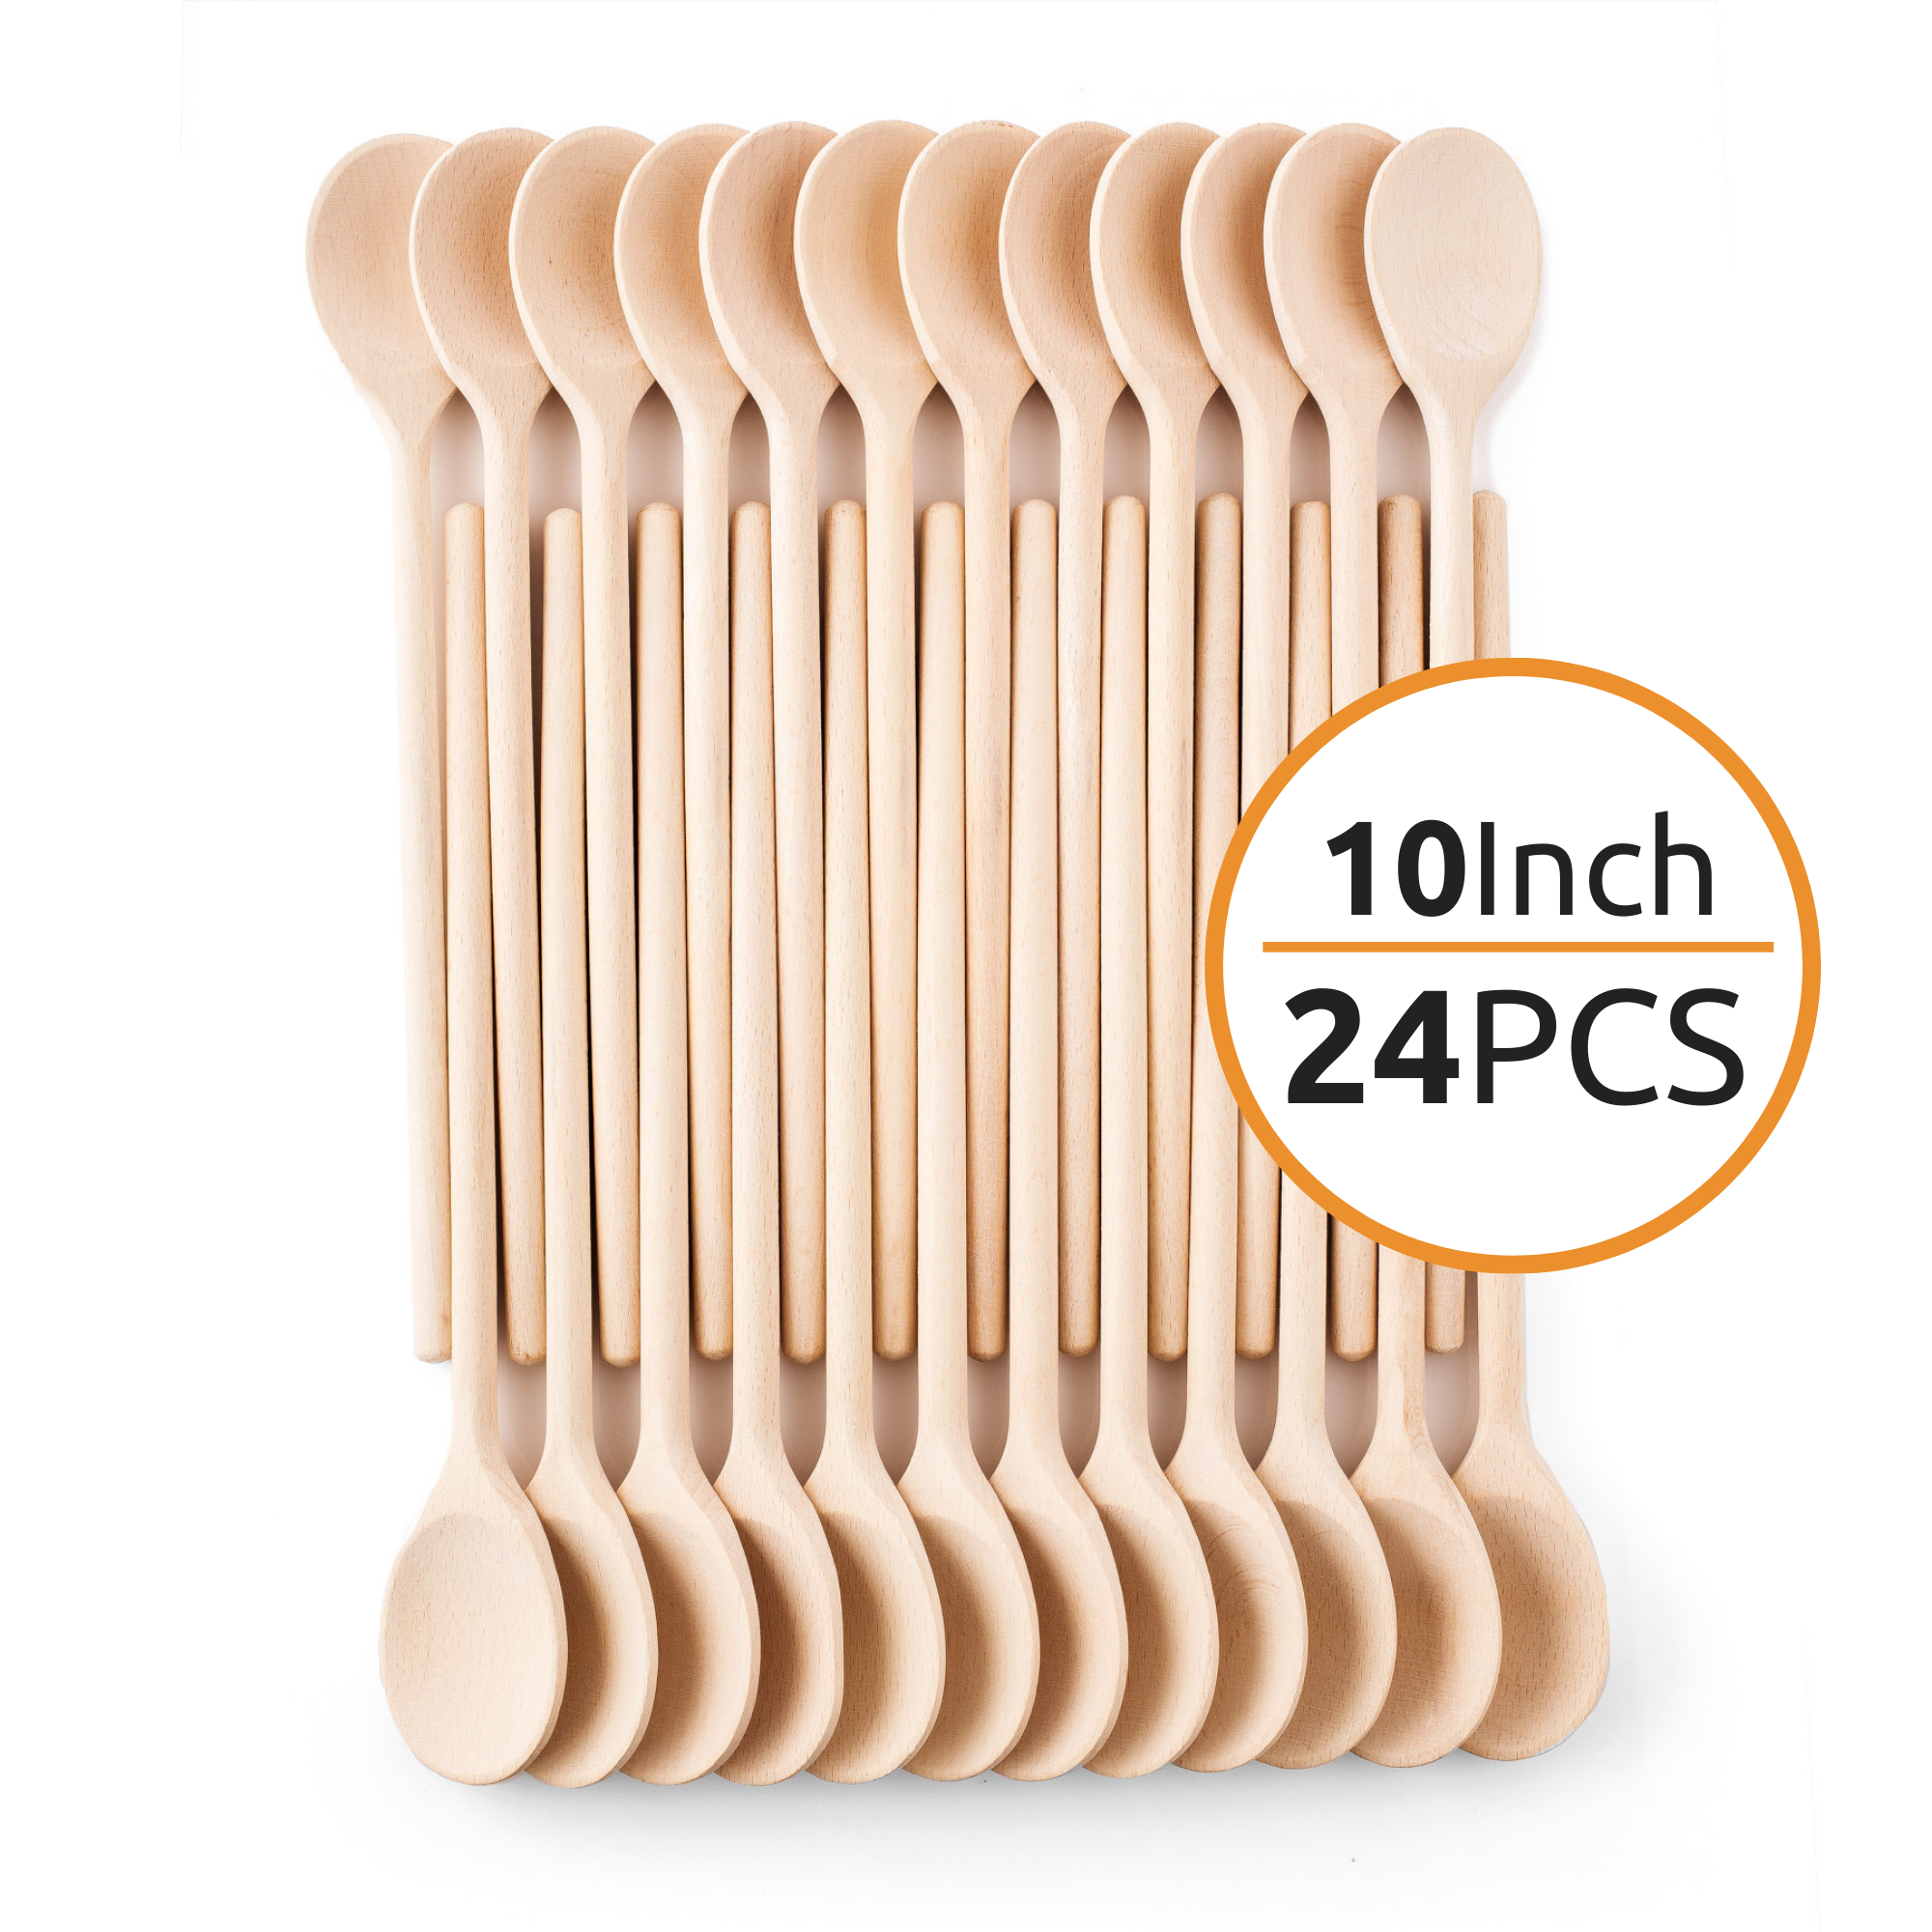 Mr. Woodware - Small Wooden Spoons Bulk – 10 Inch – Set of 24